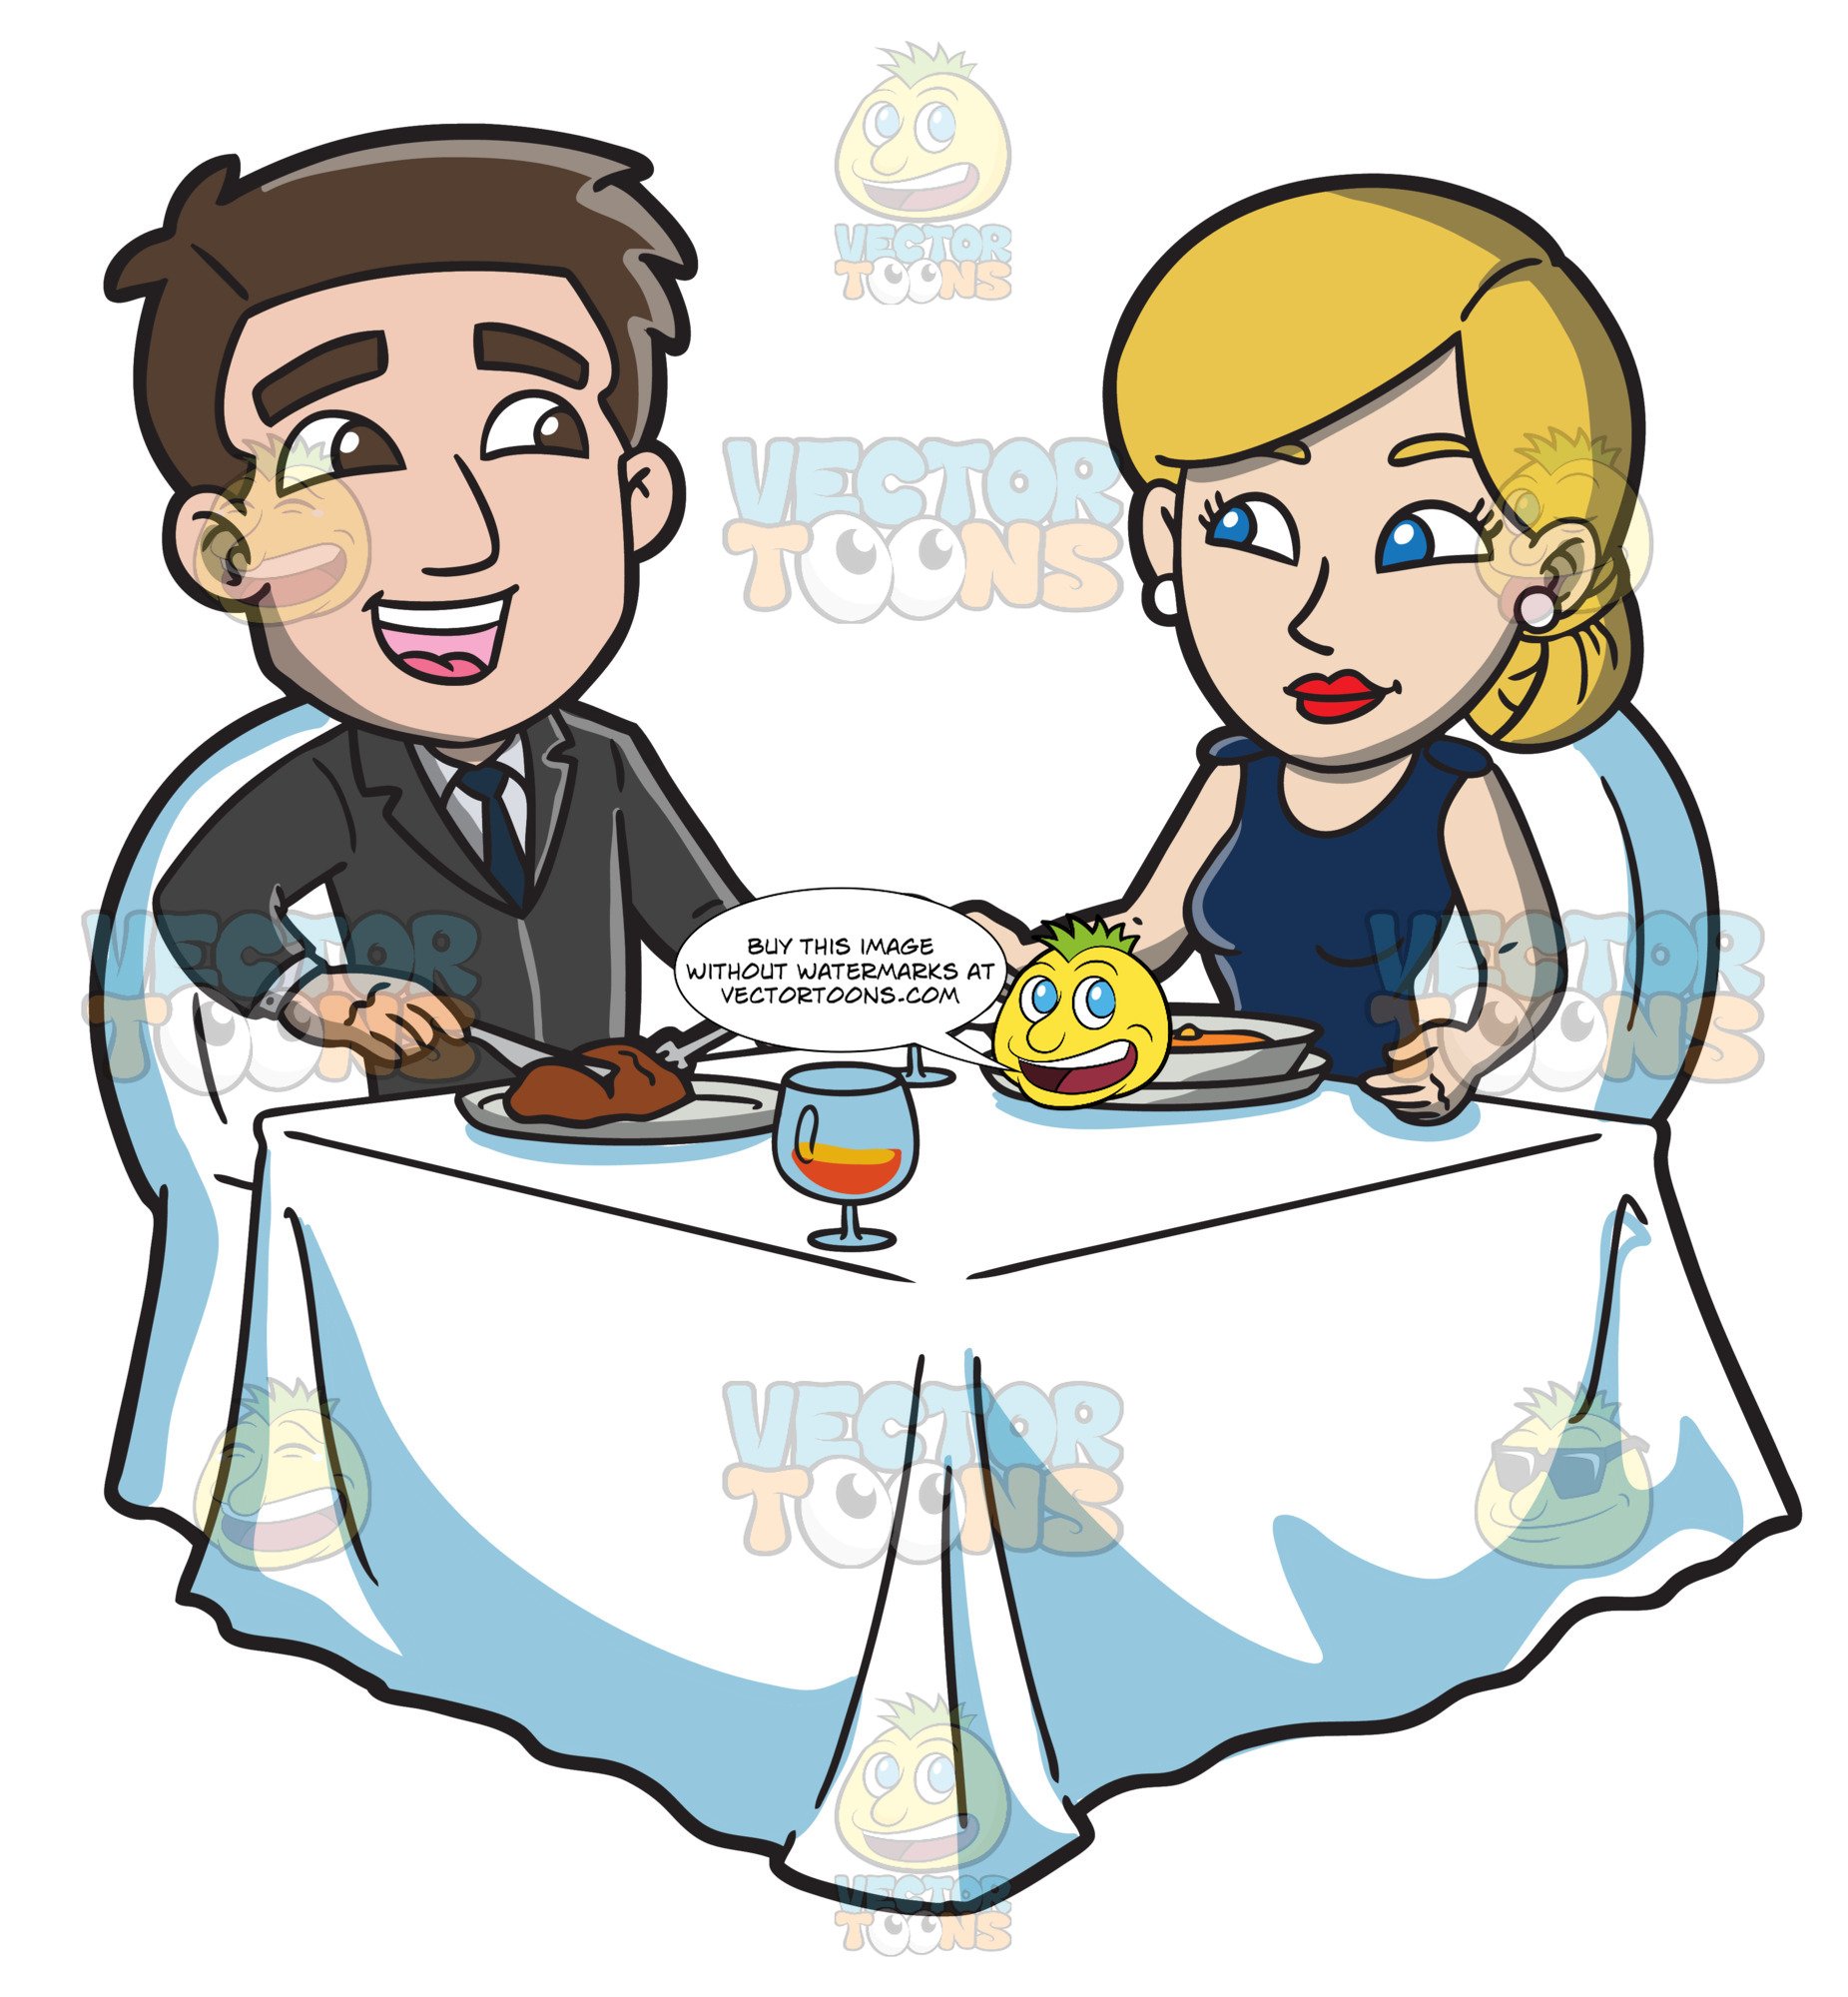 A couple celebrating their. Anniversary clipart anniversary dinner